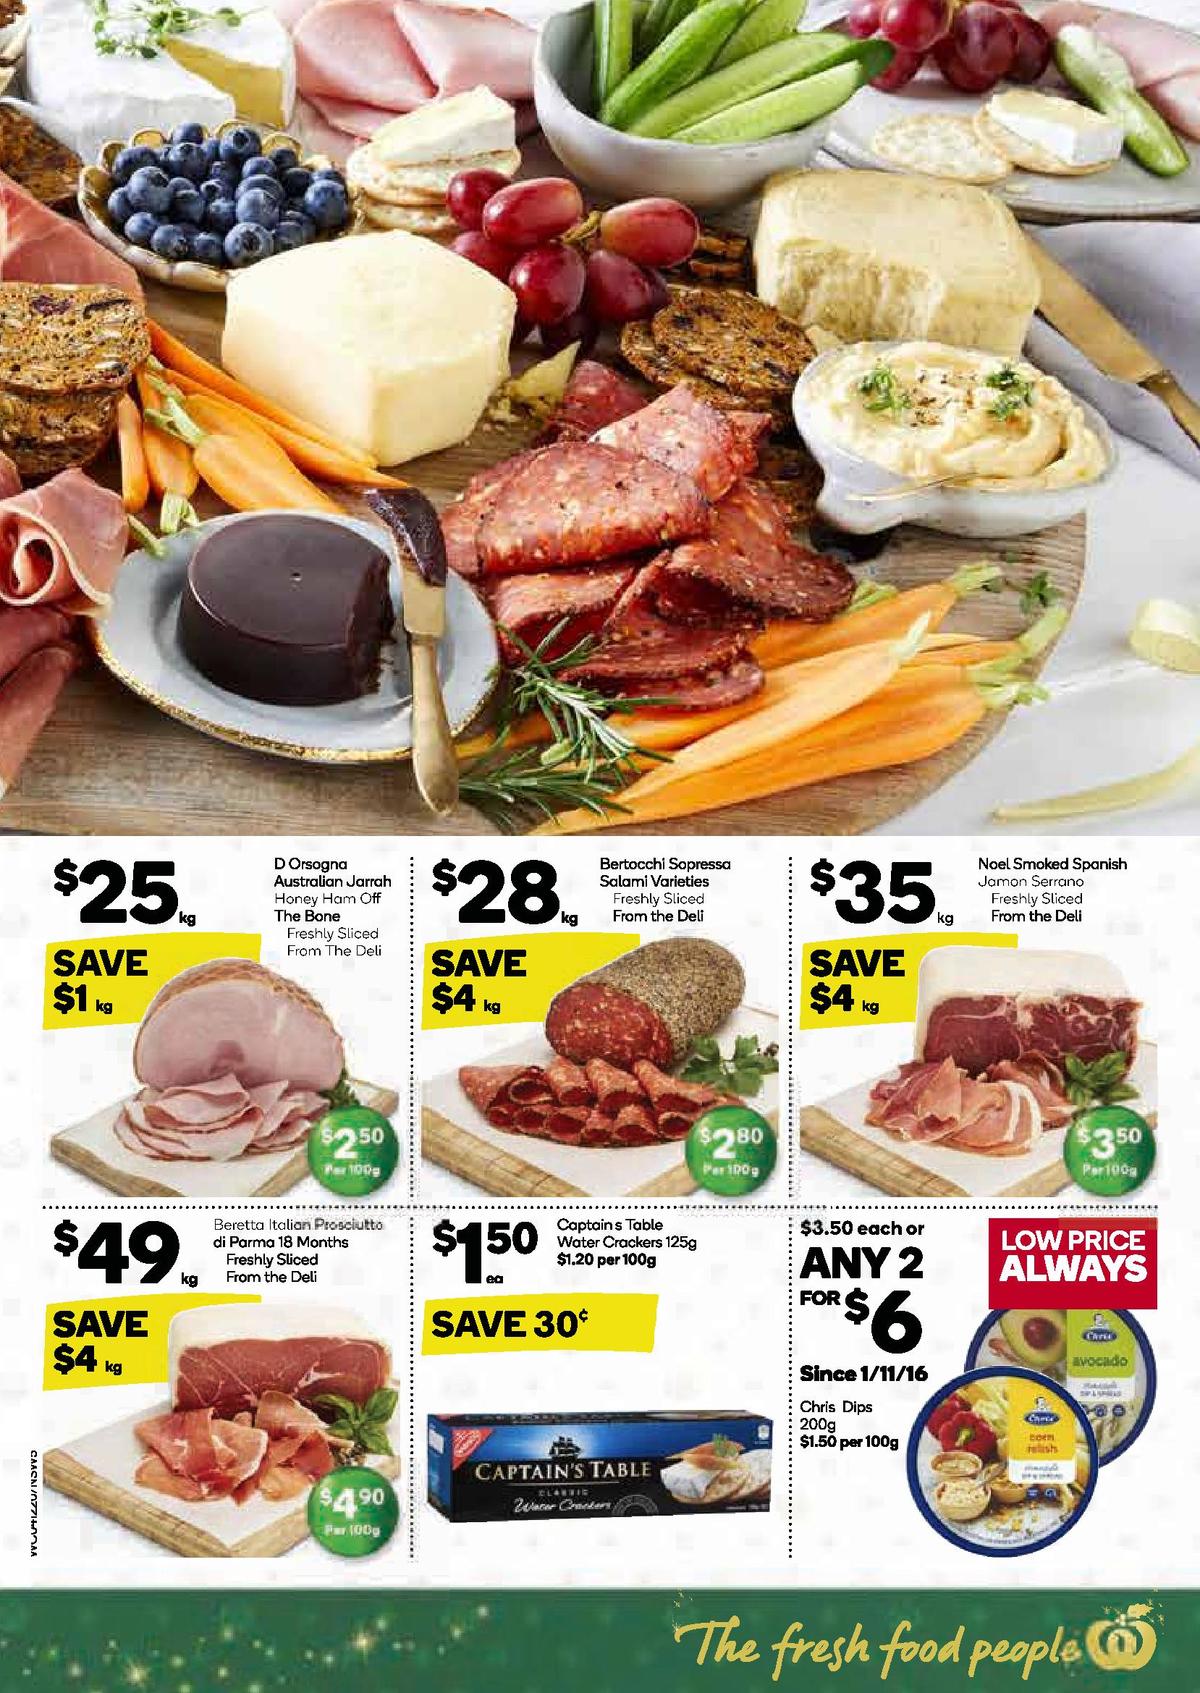 Woolworths Catalogues from 4 December